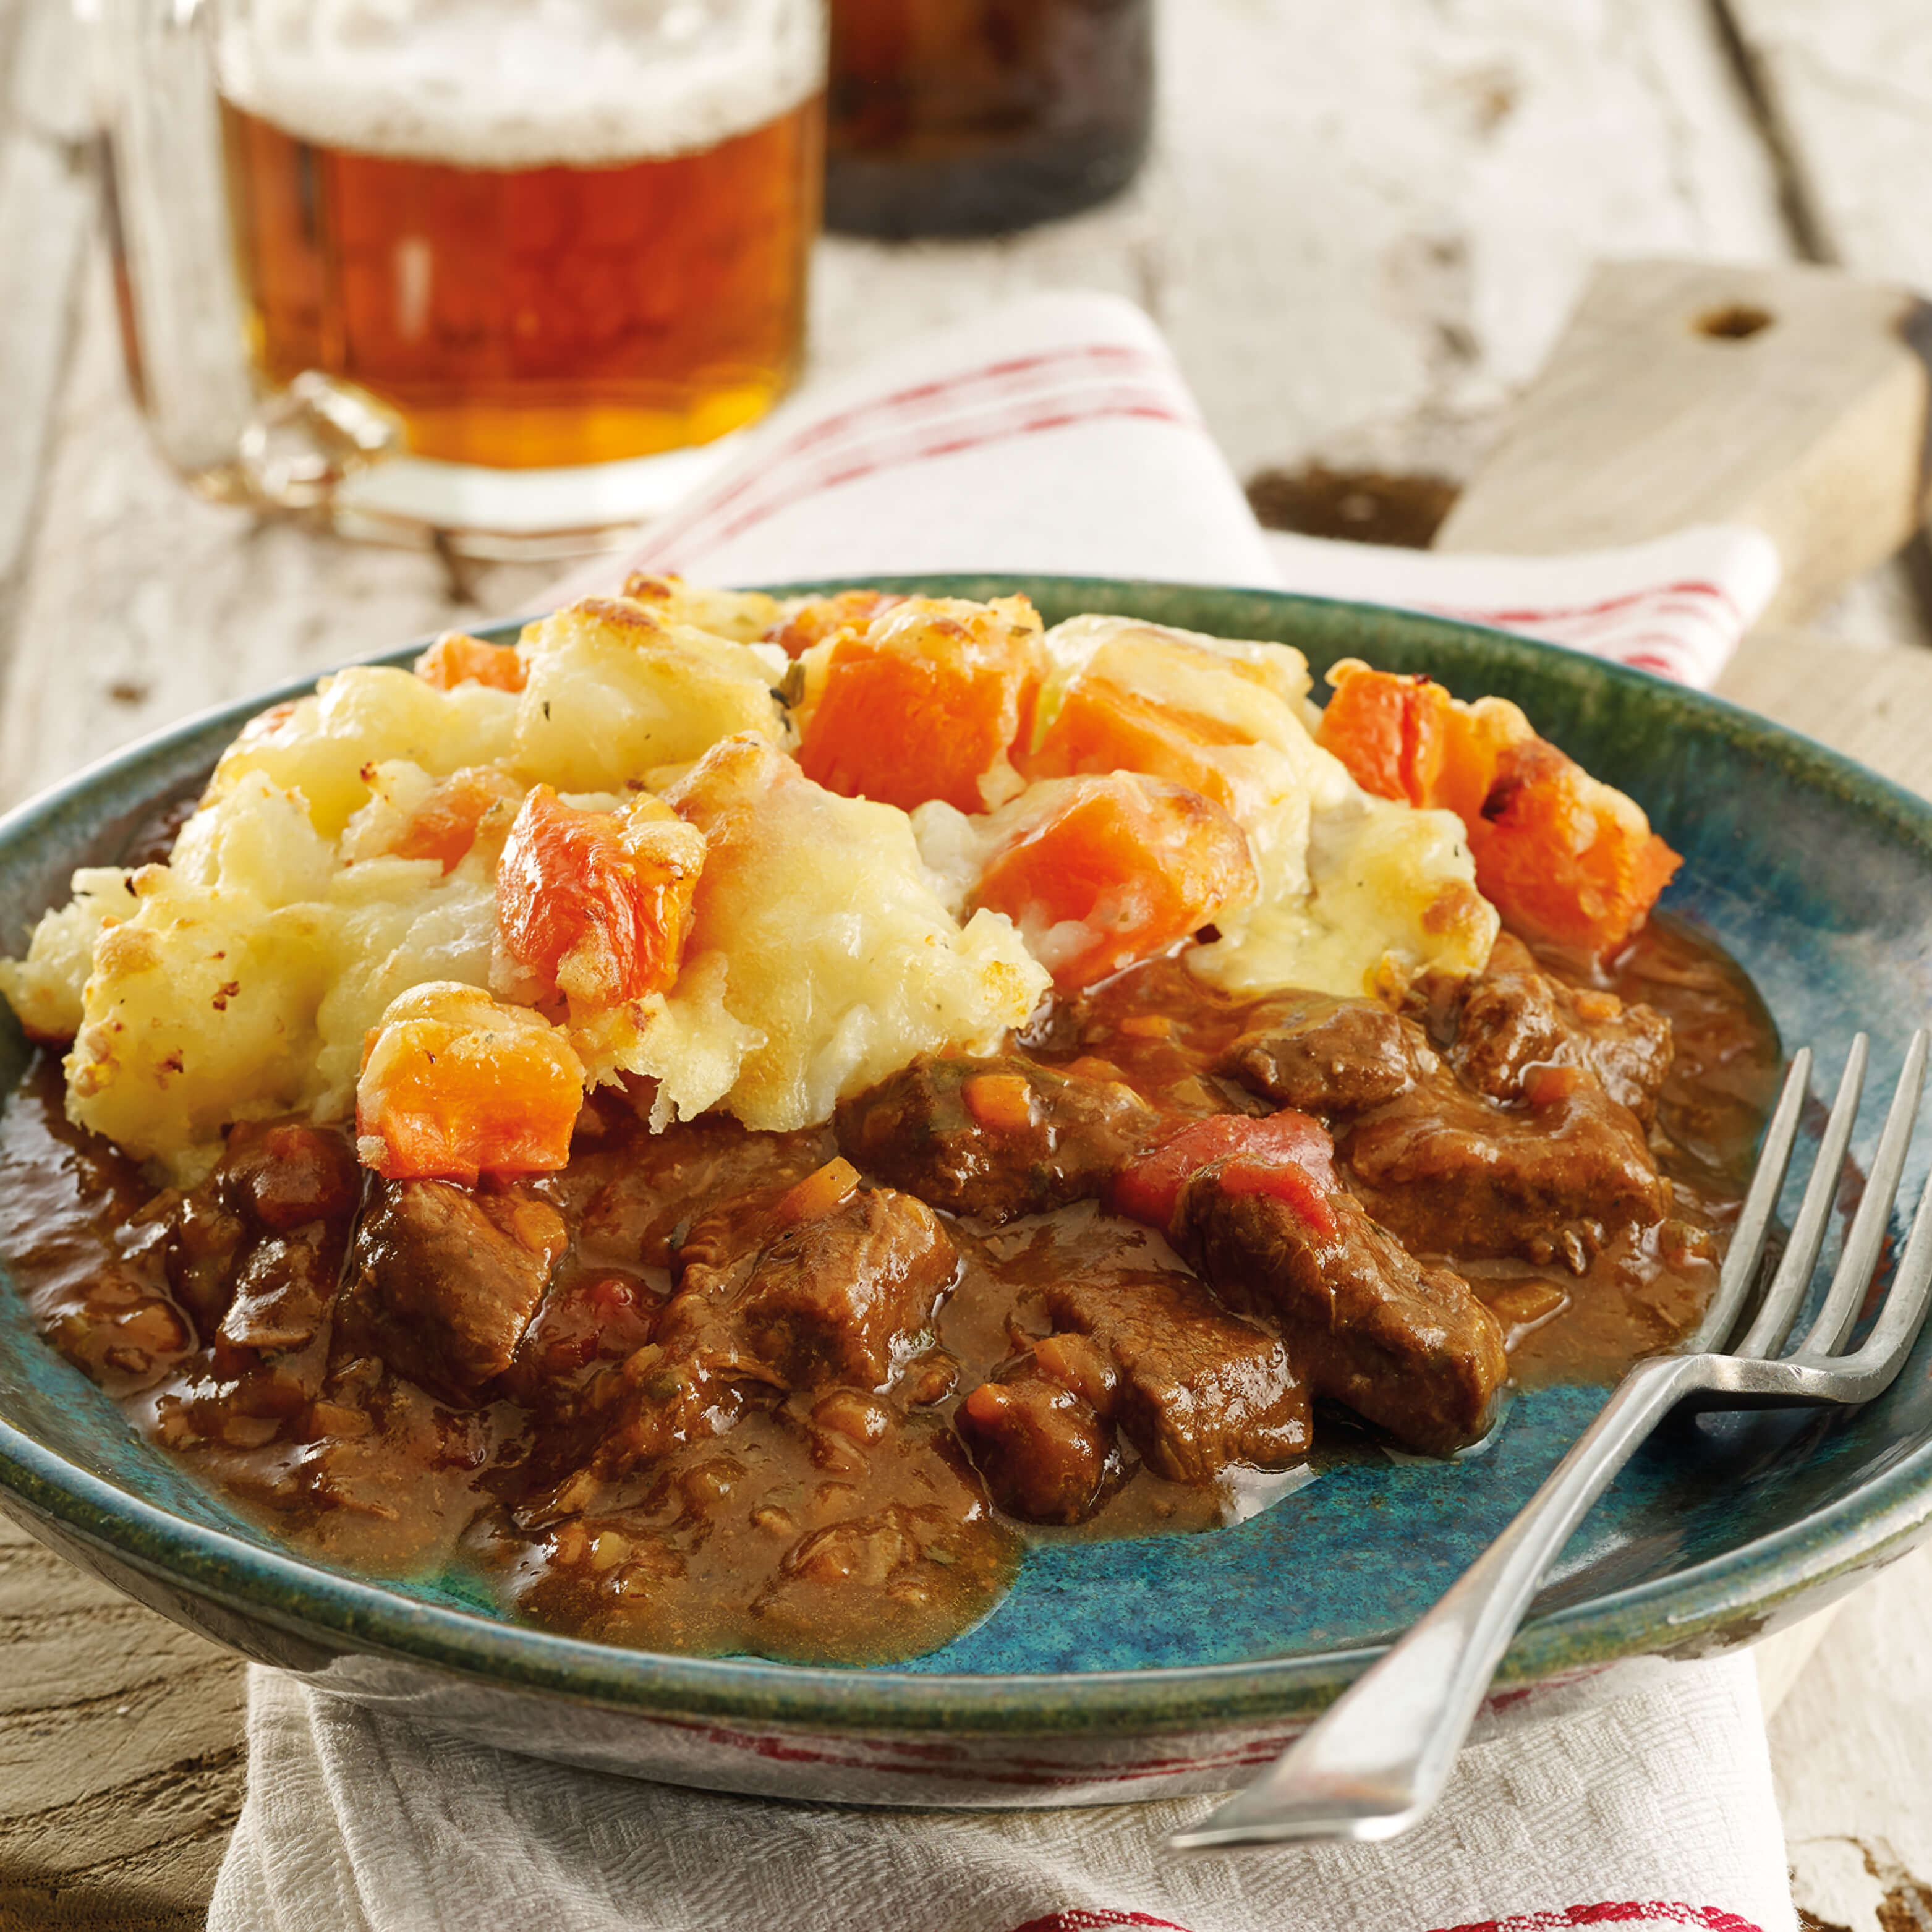 Rustic Cottage Pie OF